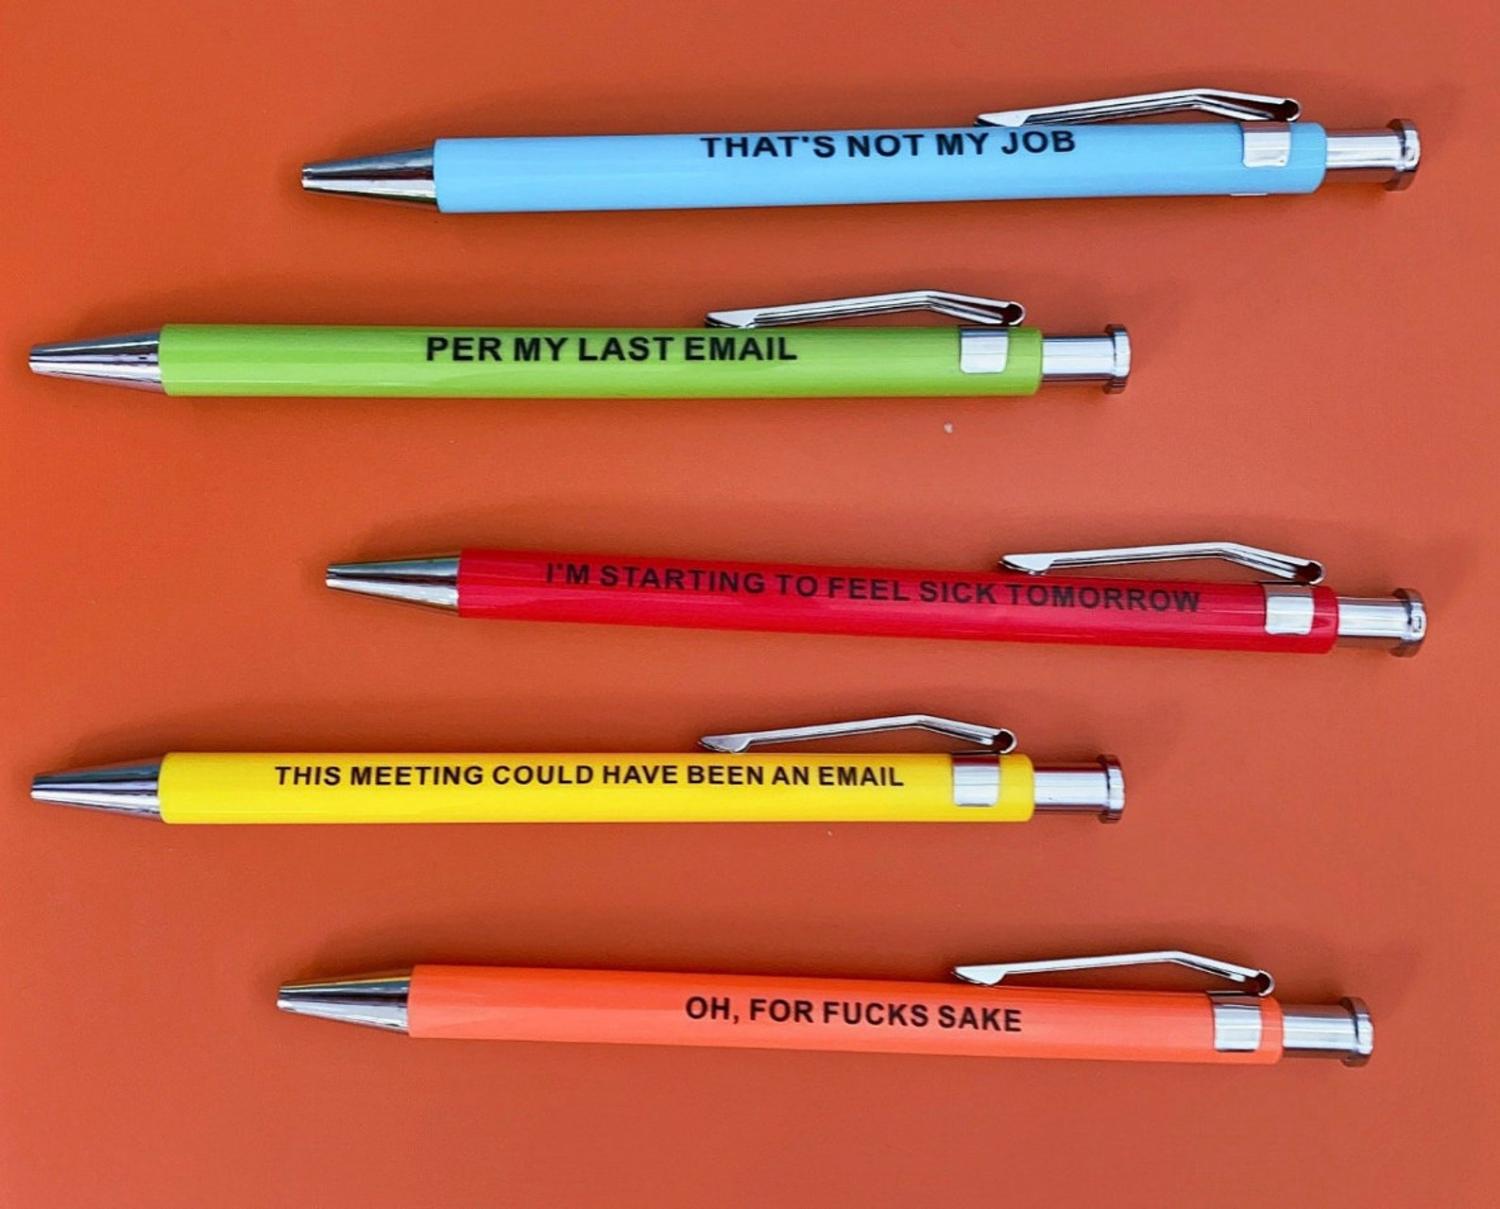 https://odditymall.com/includes/content/upload/offensive-office-pens-8442.jpg